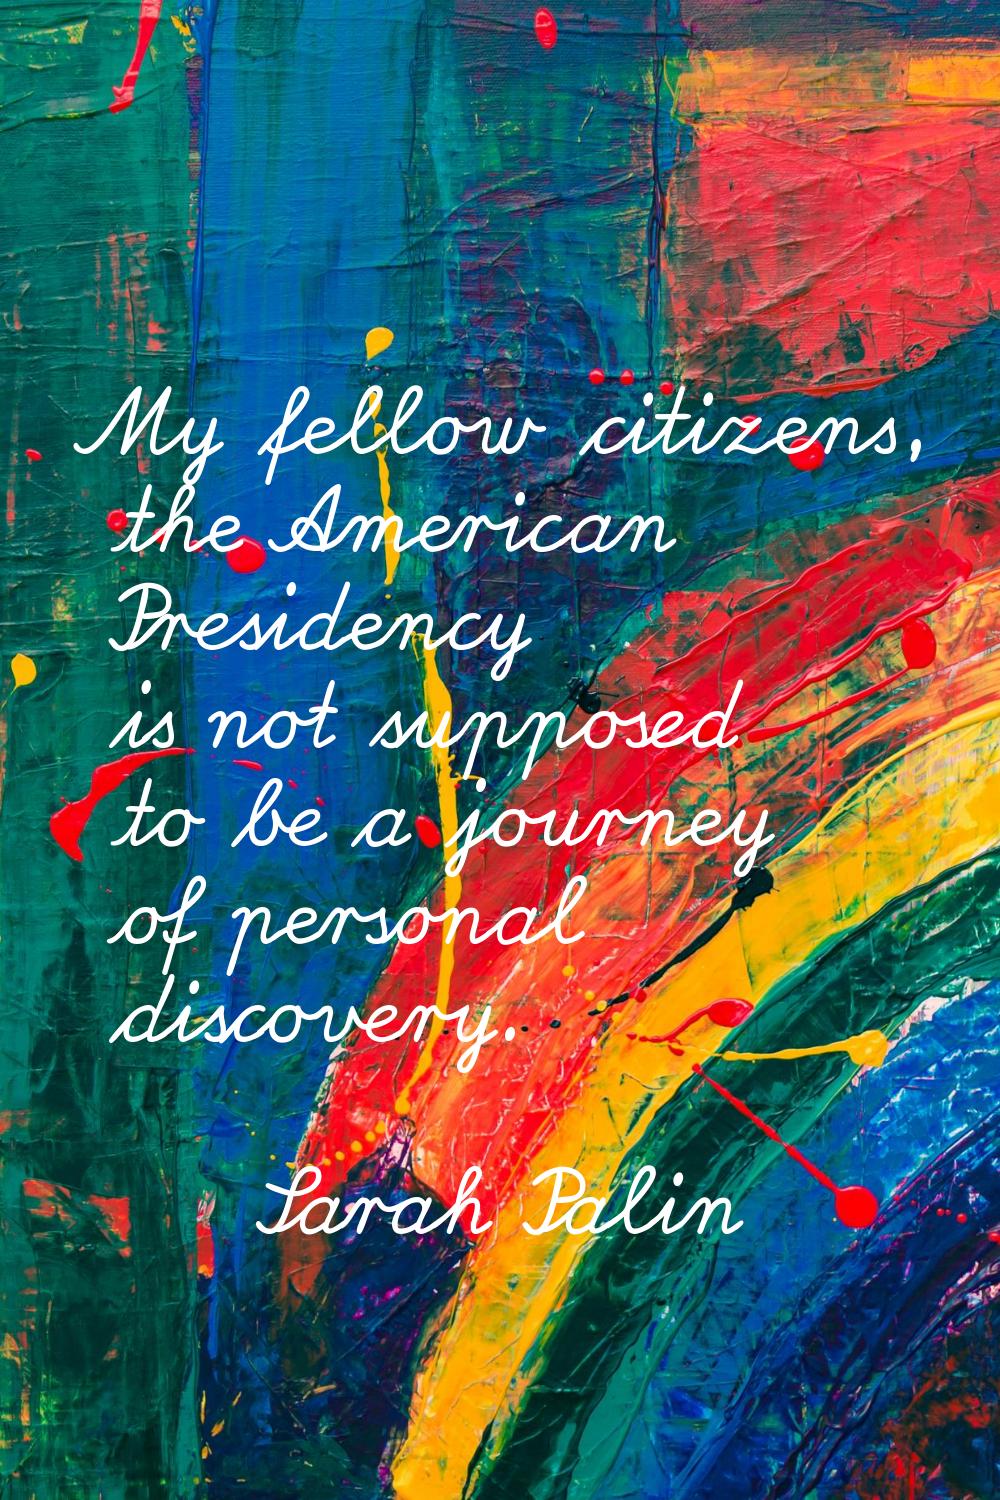 My fellow citizens, the American Presidency is not supposed to be a journey of personal discovery.